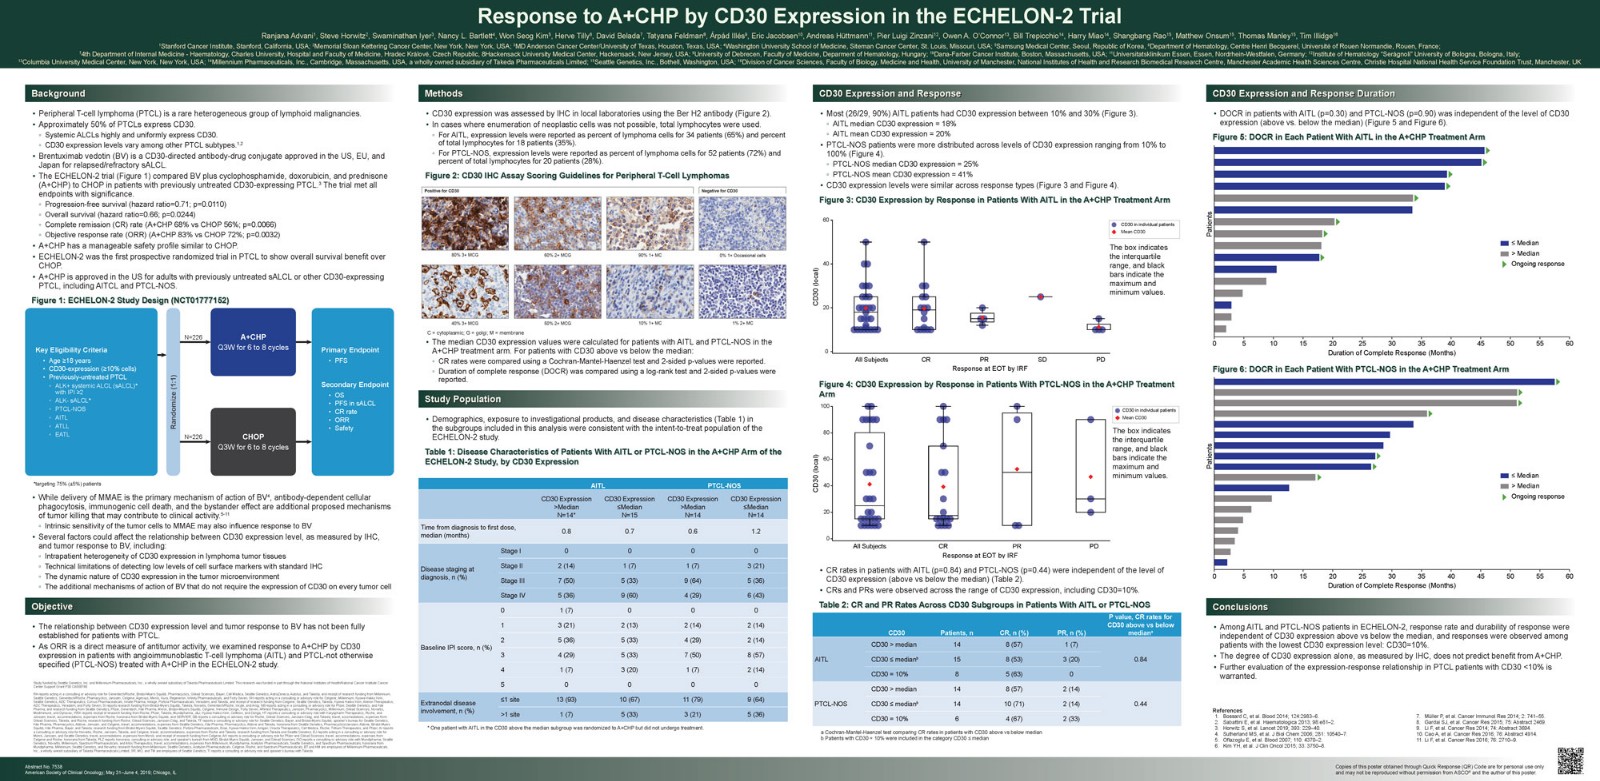 ASCO 2019：<font color="red">Brentuximab</font> <font color="red">vedotin</font>治疗淋巴瘤优势显著，不依赖CD30表达